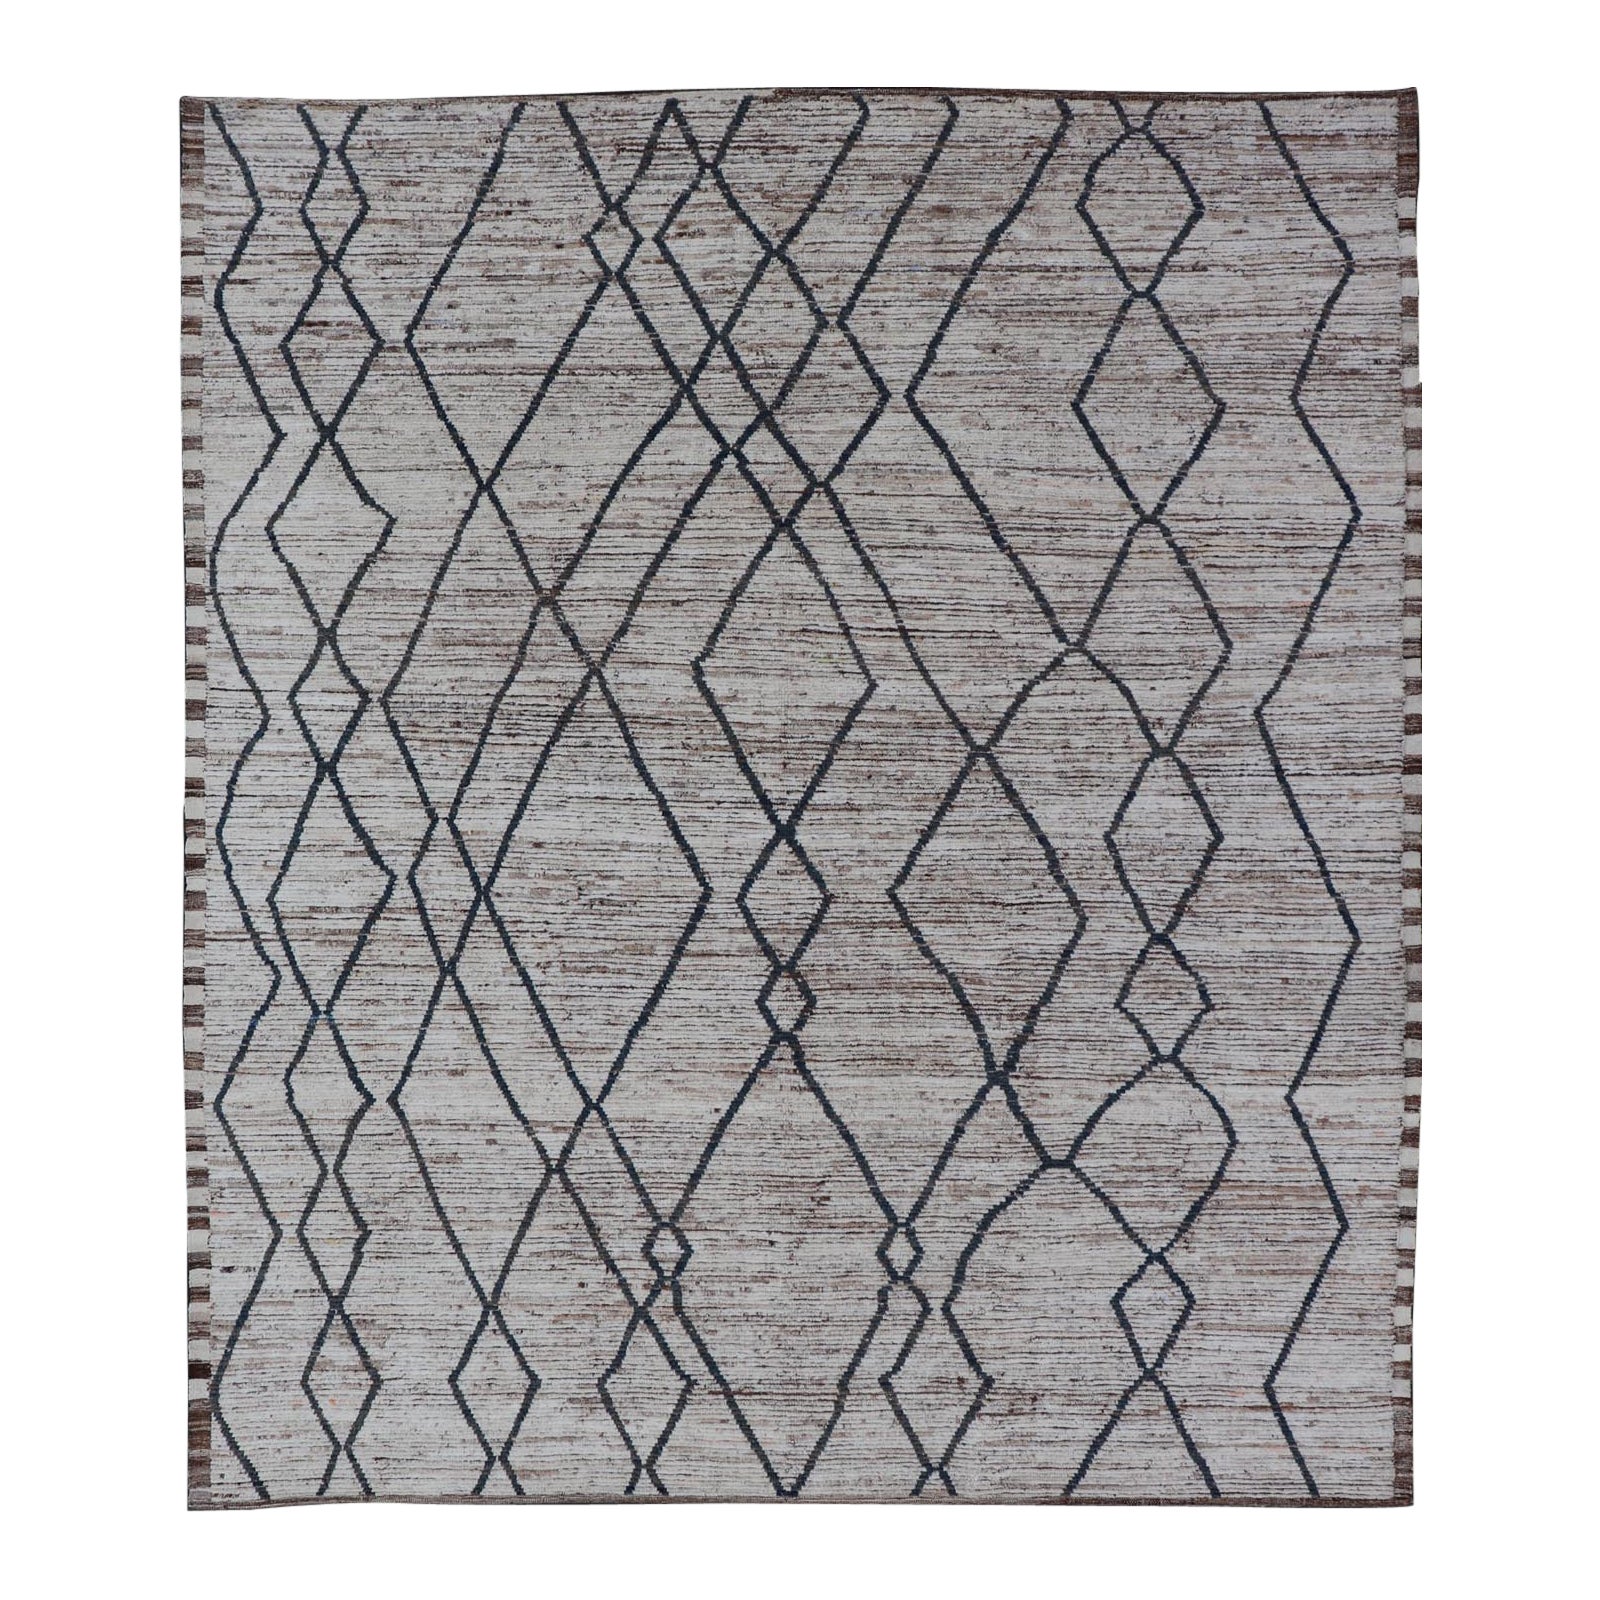 Modern Causal Tribal Rug in Wool with Free Flowing Design in Cream and Blue's For Sale